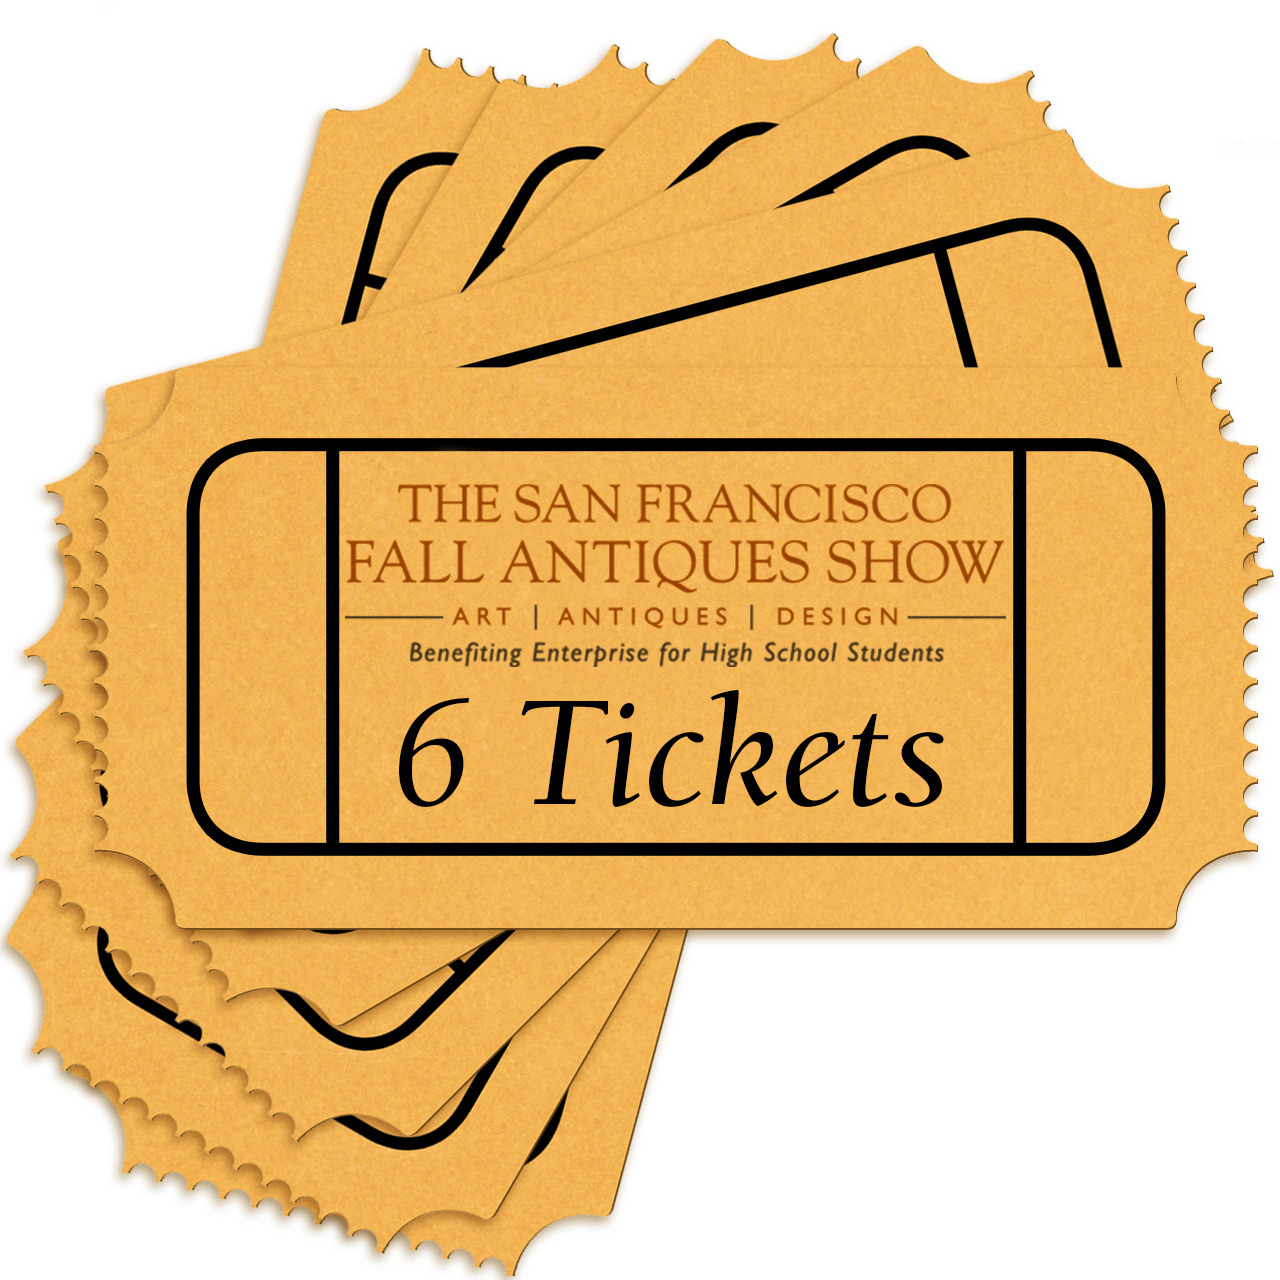 raffle-tickets-images-free-download-on-clipartmag-alice-in-wonderland-printable-tickets-1-100